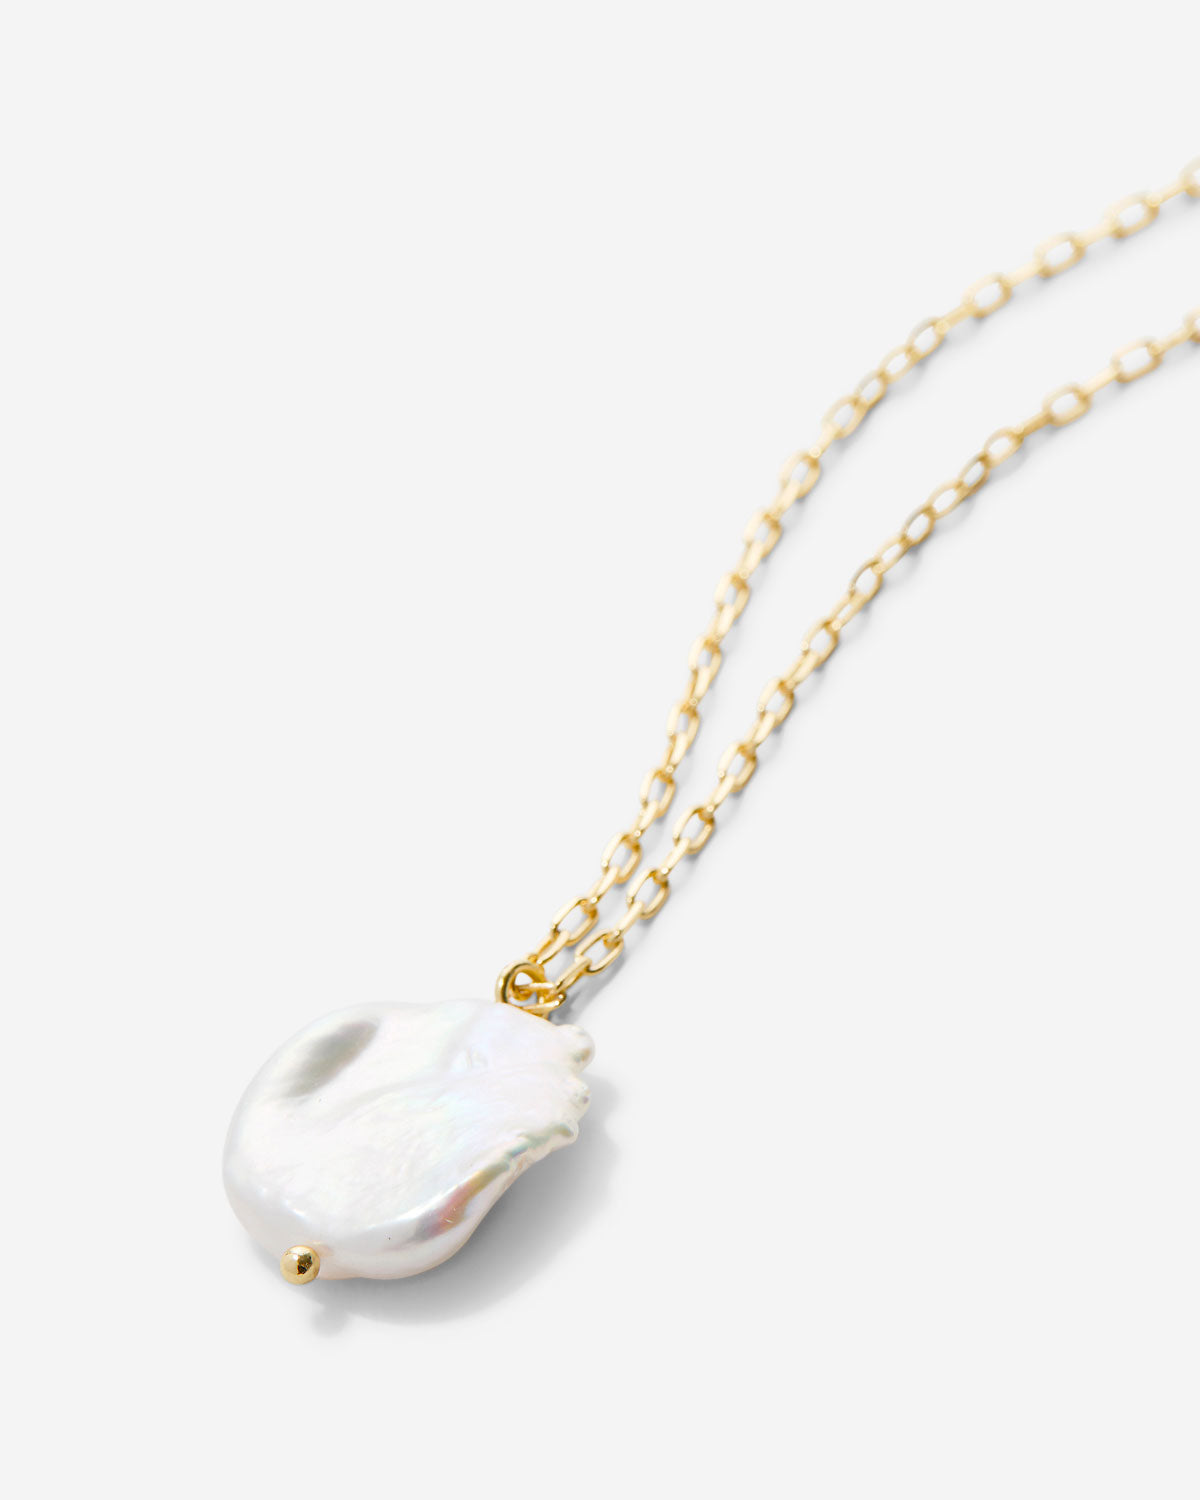    ba-necklace-grit-baroque-pearl-gold-v2  1200 × 1500px  Bryan Anthonys Grit Pendant Necklace Gold Macro